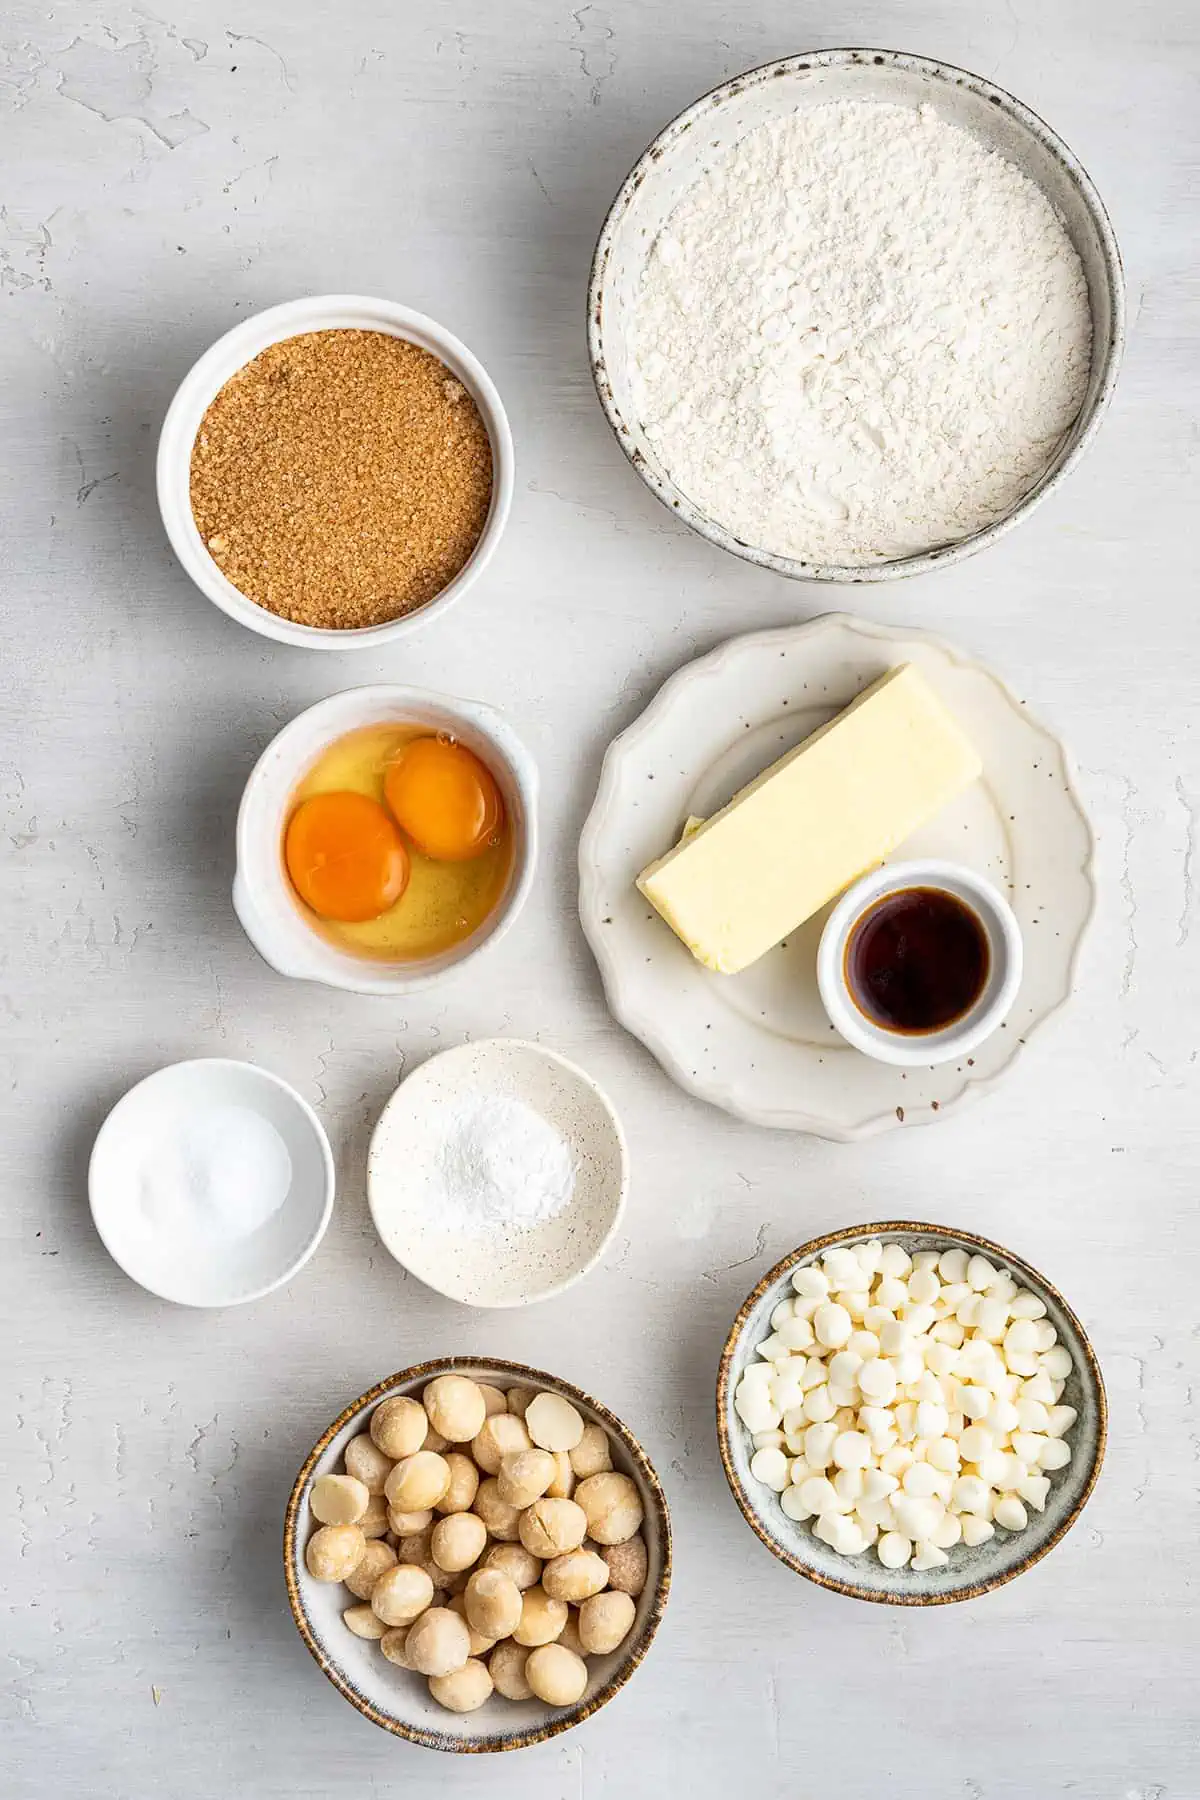 Overhead view of the ingredients needed for macadamia nut cookies: a bowl of flour, a bowl of raw sugar, a bowl of eggs, a bowl of baking powder, a bowl of baking soda, a bowl of white chocolate chips, a bowl of macadamia nuts, a bowl of vanilla extract, and a stick of butter